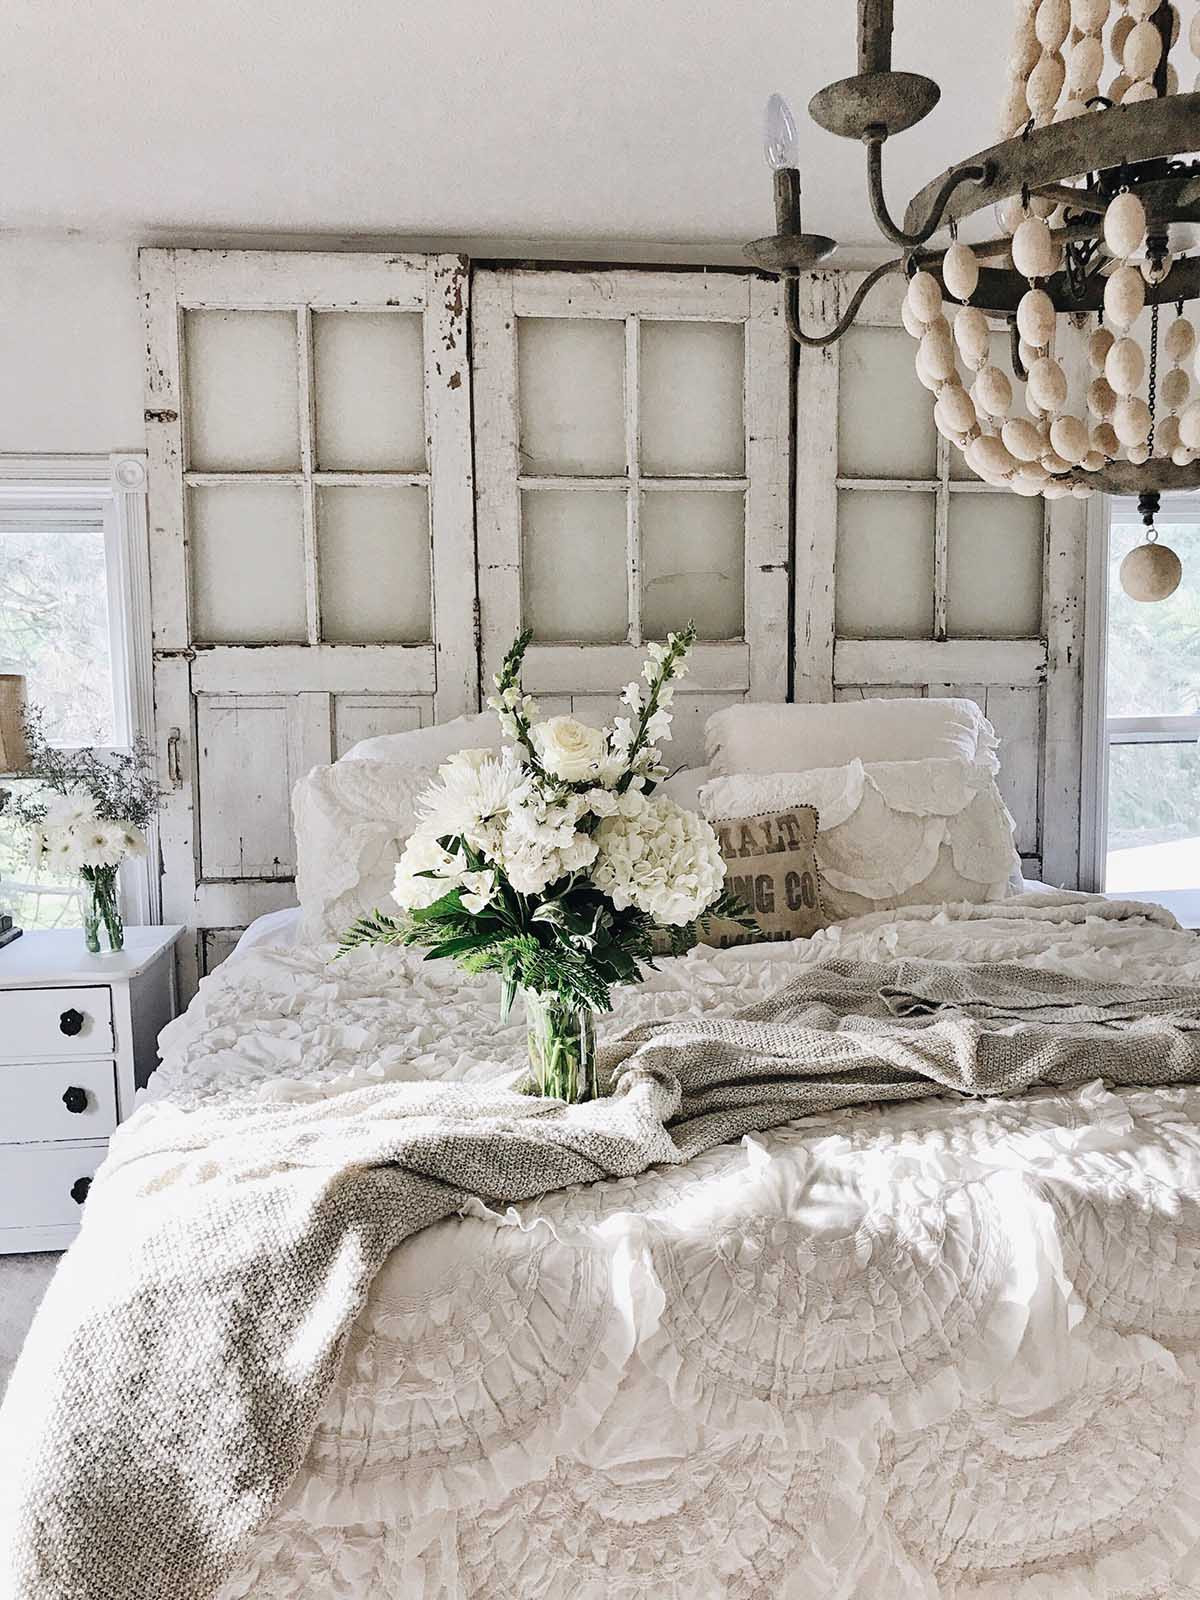 French Shabby Chic Bedroom Ideas
 30 Best French Country Bedroom Decor and Design Ideas for 2020